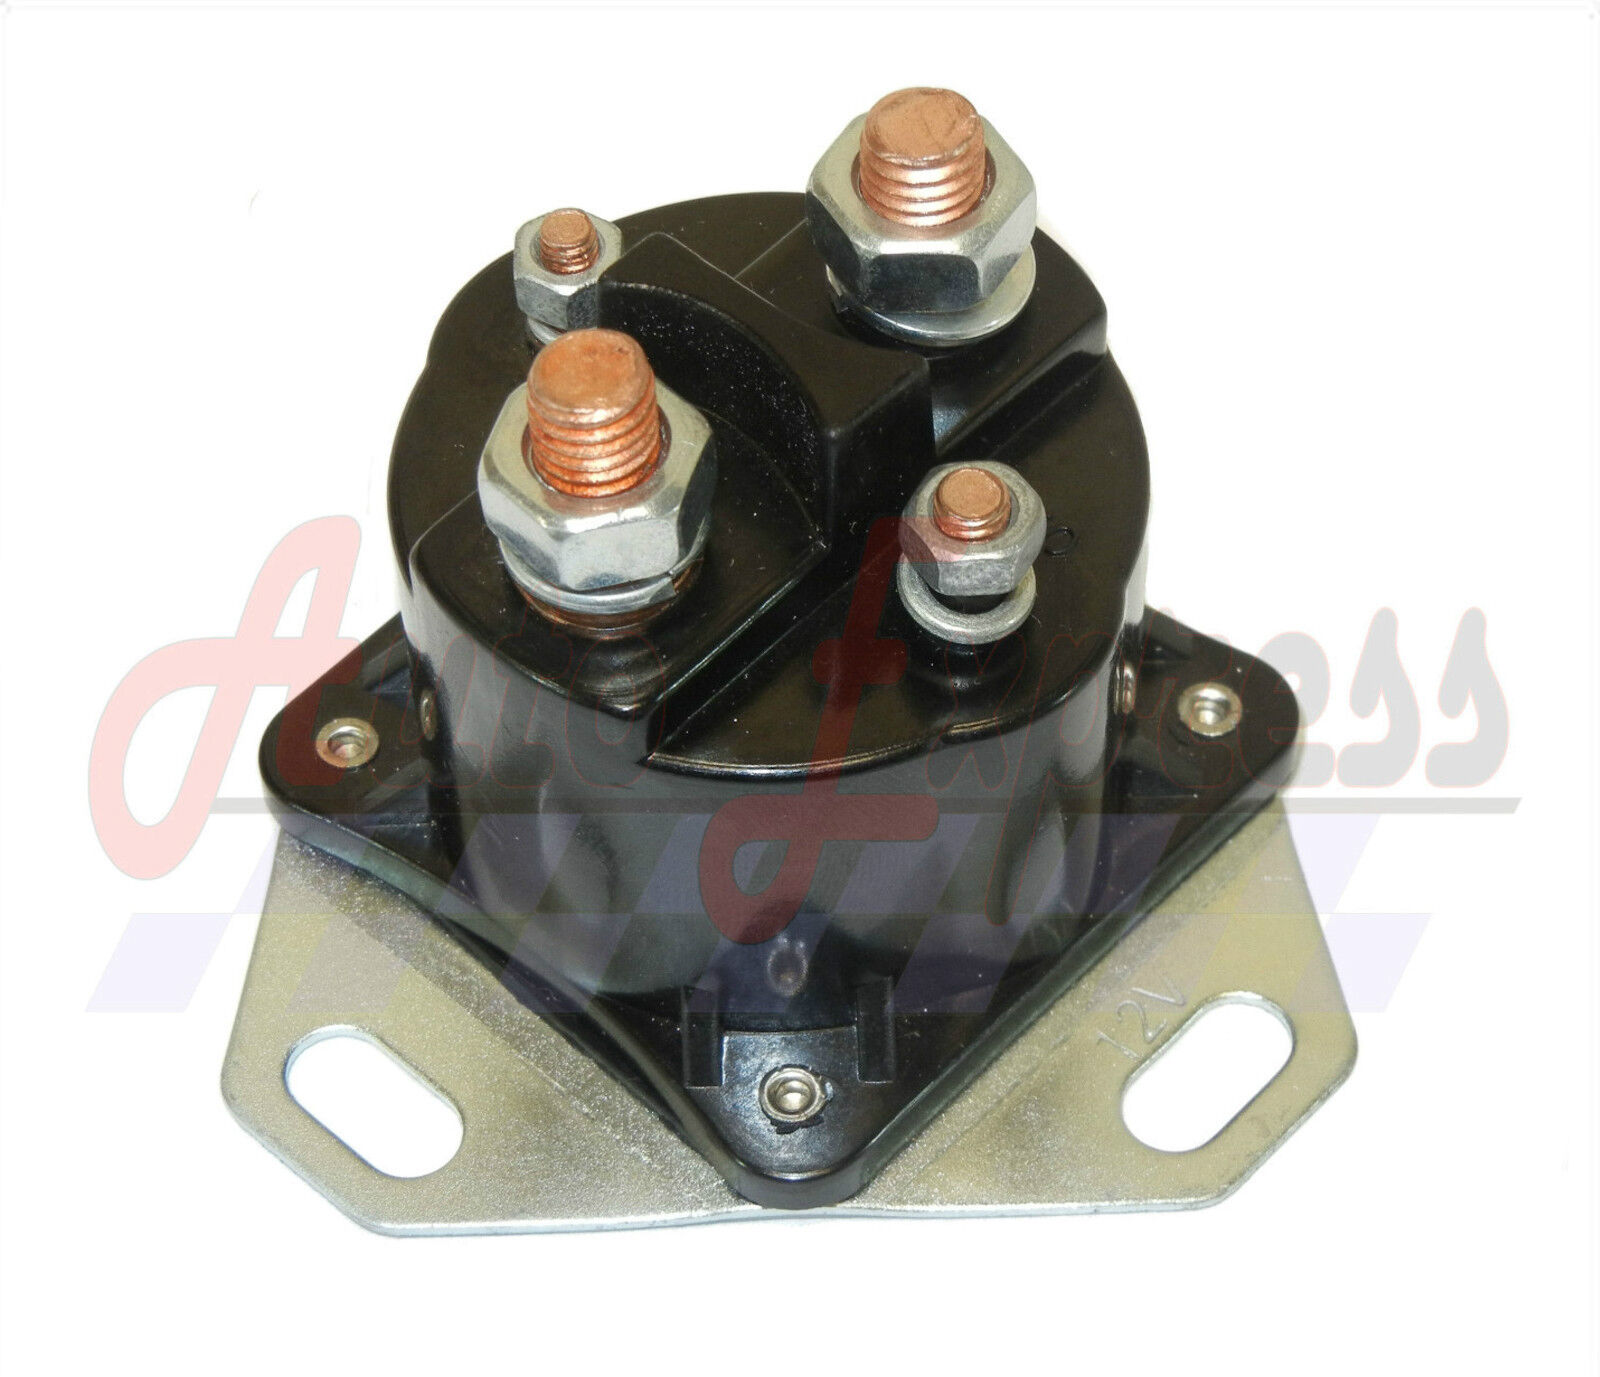 FORD DIESEL Glow Plug Relay Solenoid FOR 6.9 7.3 Turbo & Non F Series E Series